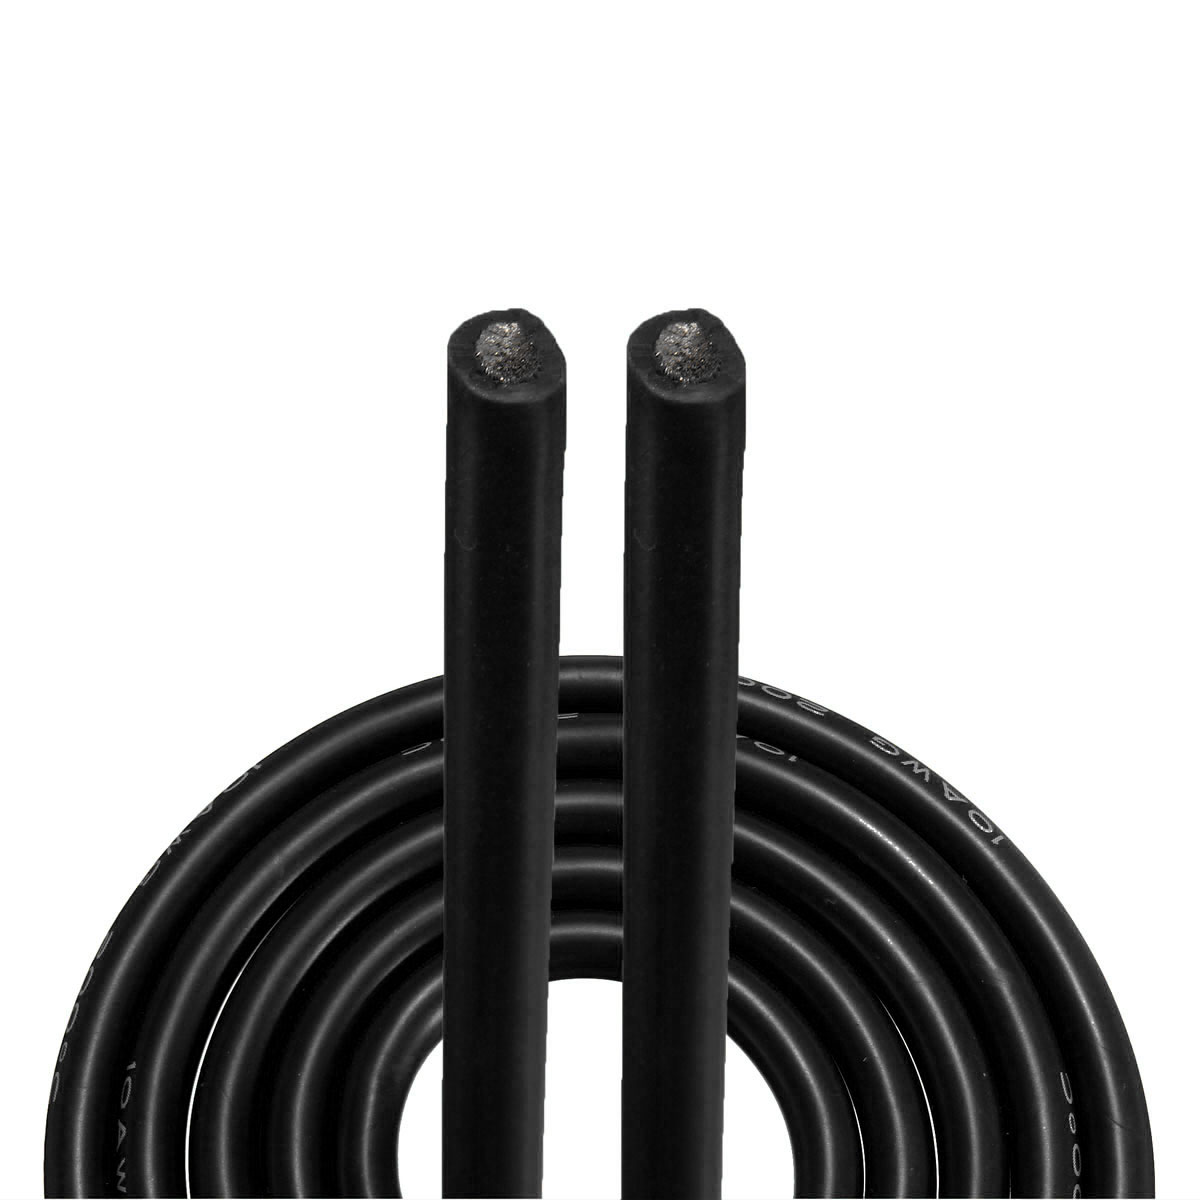 DANIU-2-Meter-Black-Silicone-Wire-Cable-10121416182022AWG-Flexible-Cable-1170287-8